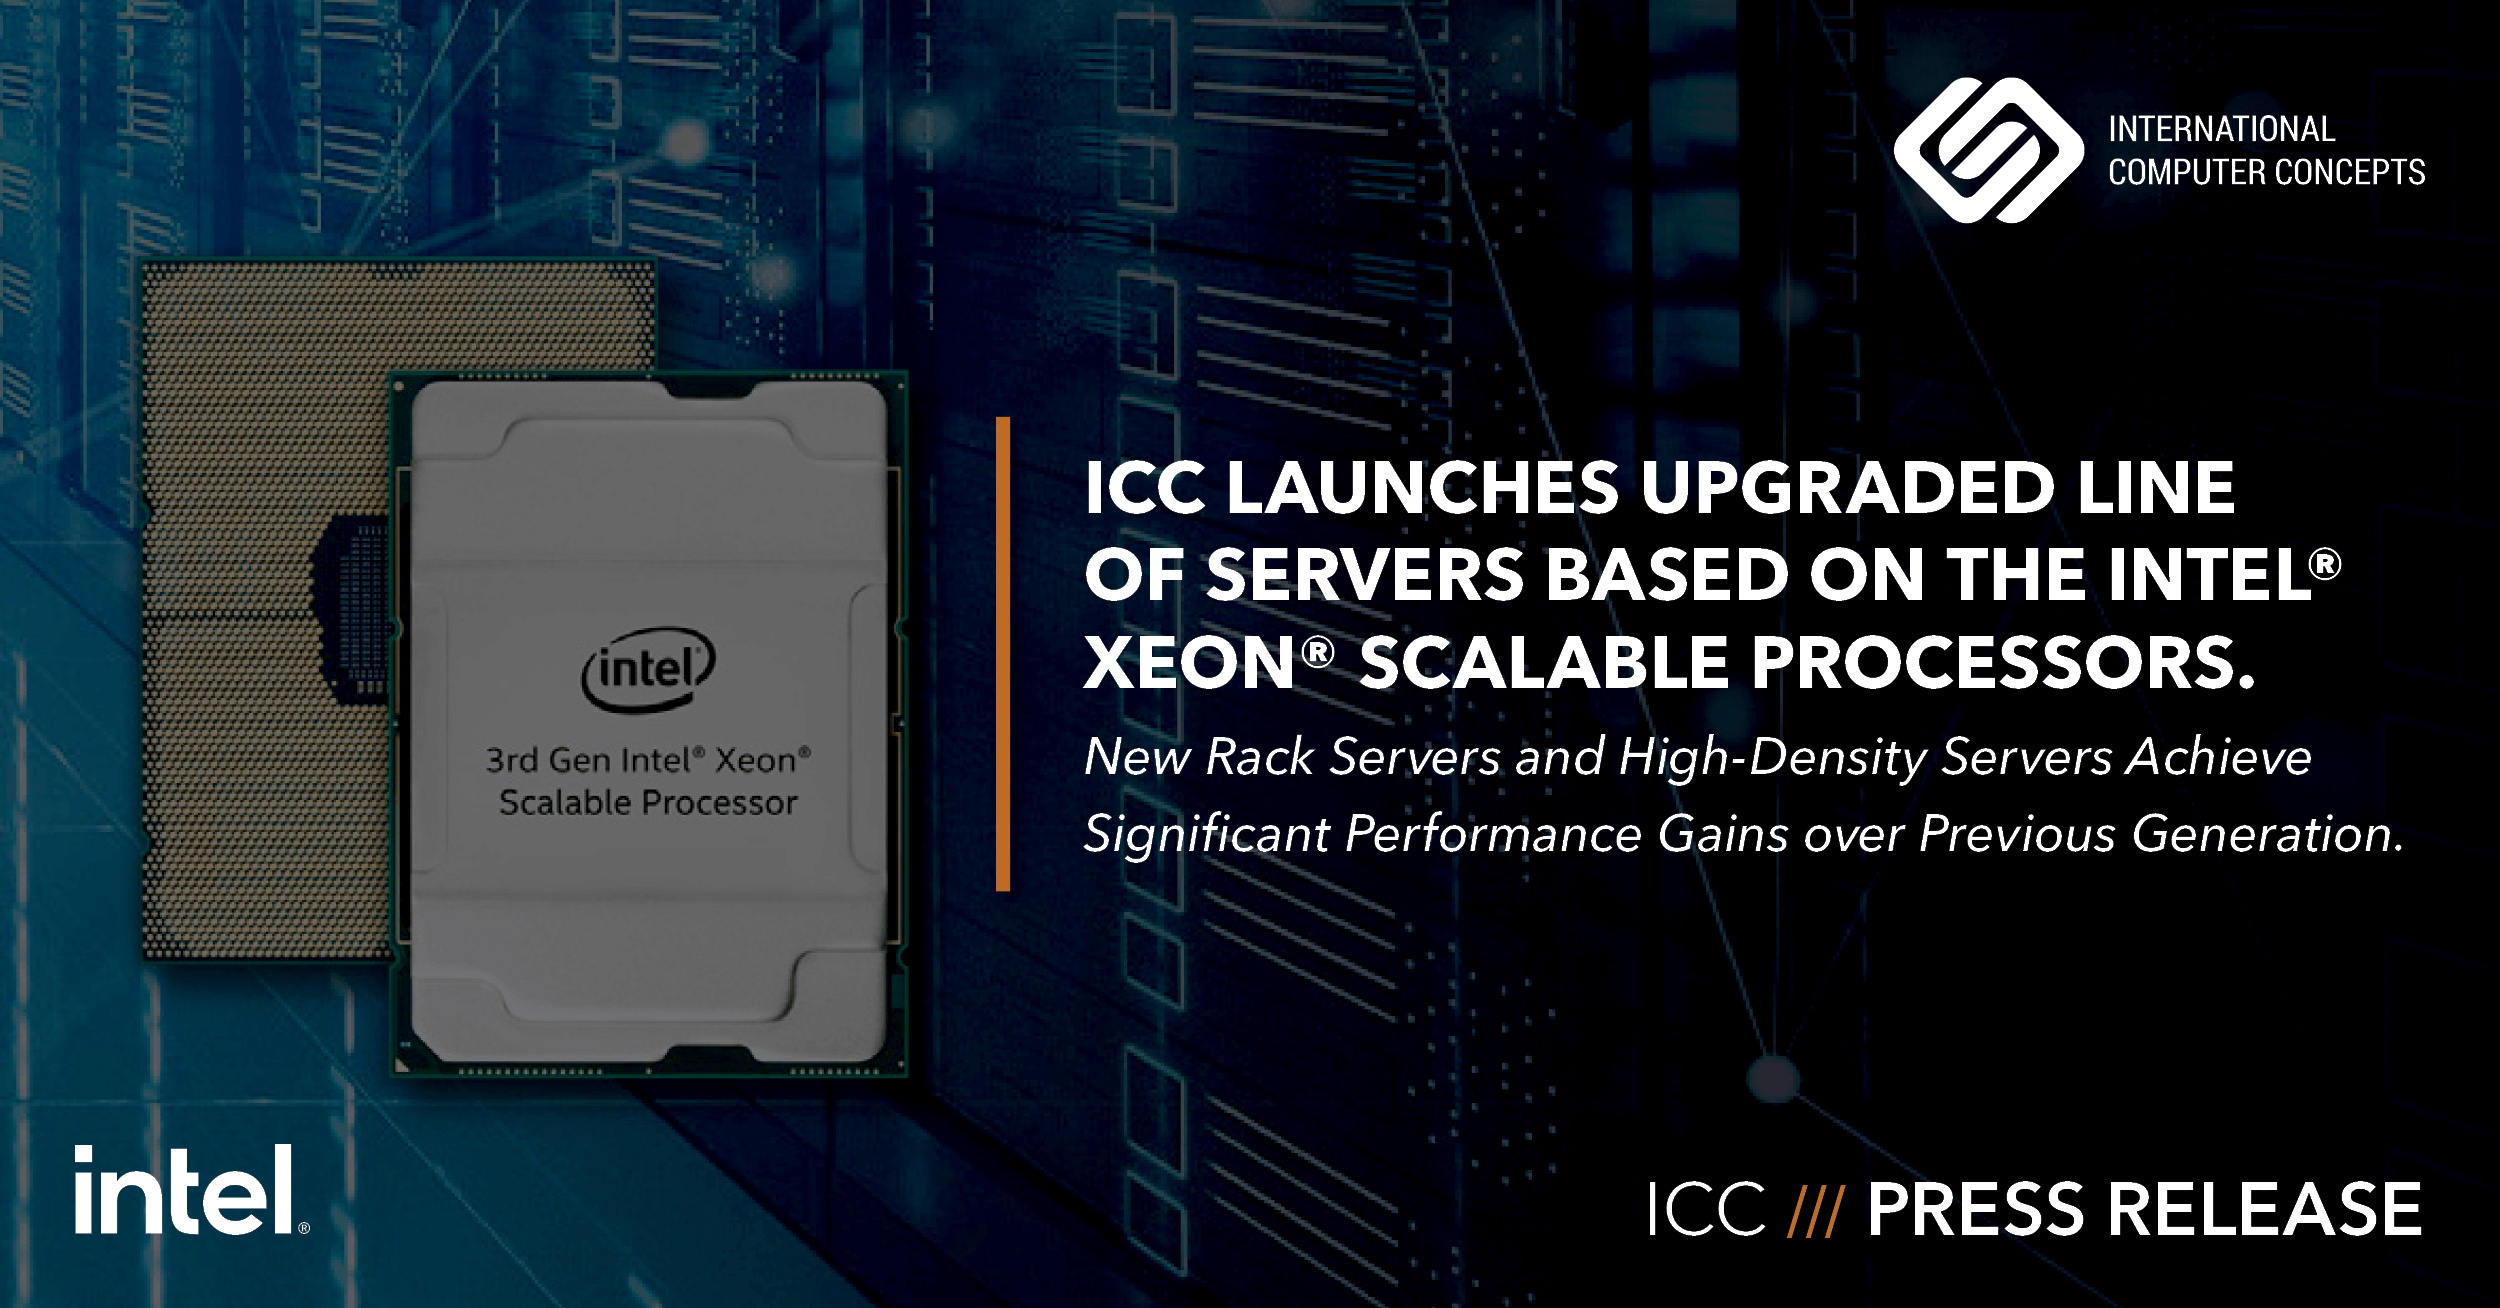 ICC Launches Upgraded Line of Servers Based on the Xeon® Scalable Processors